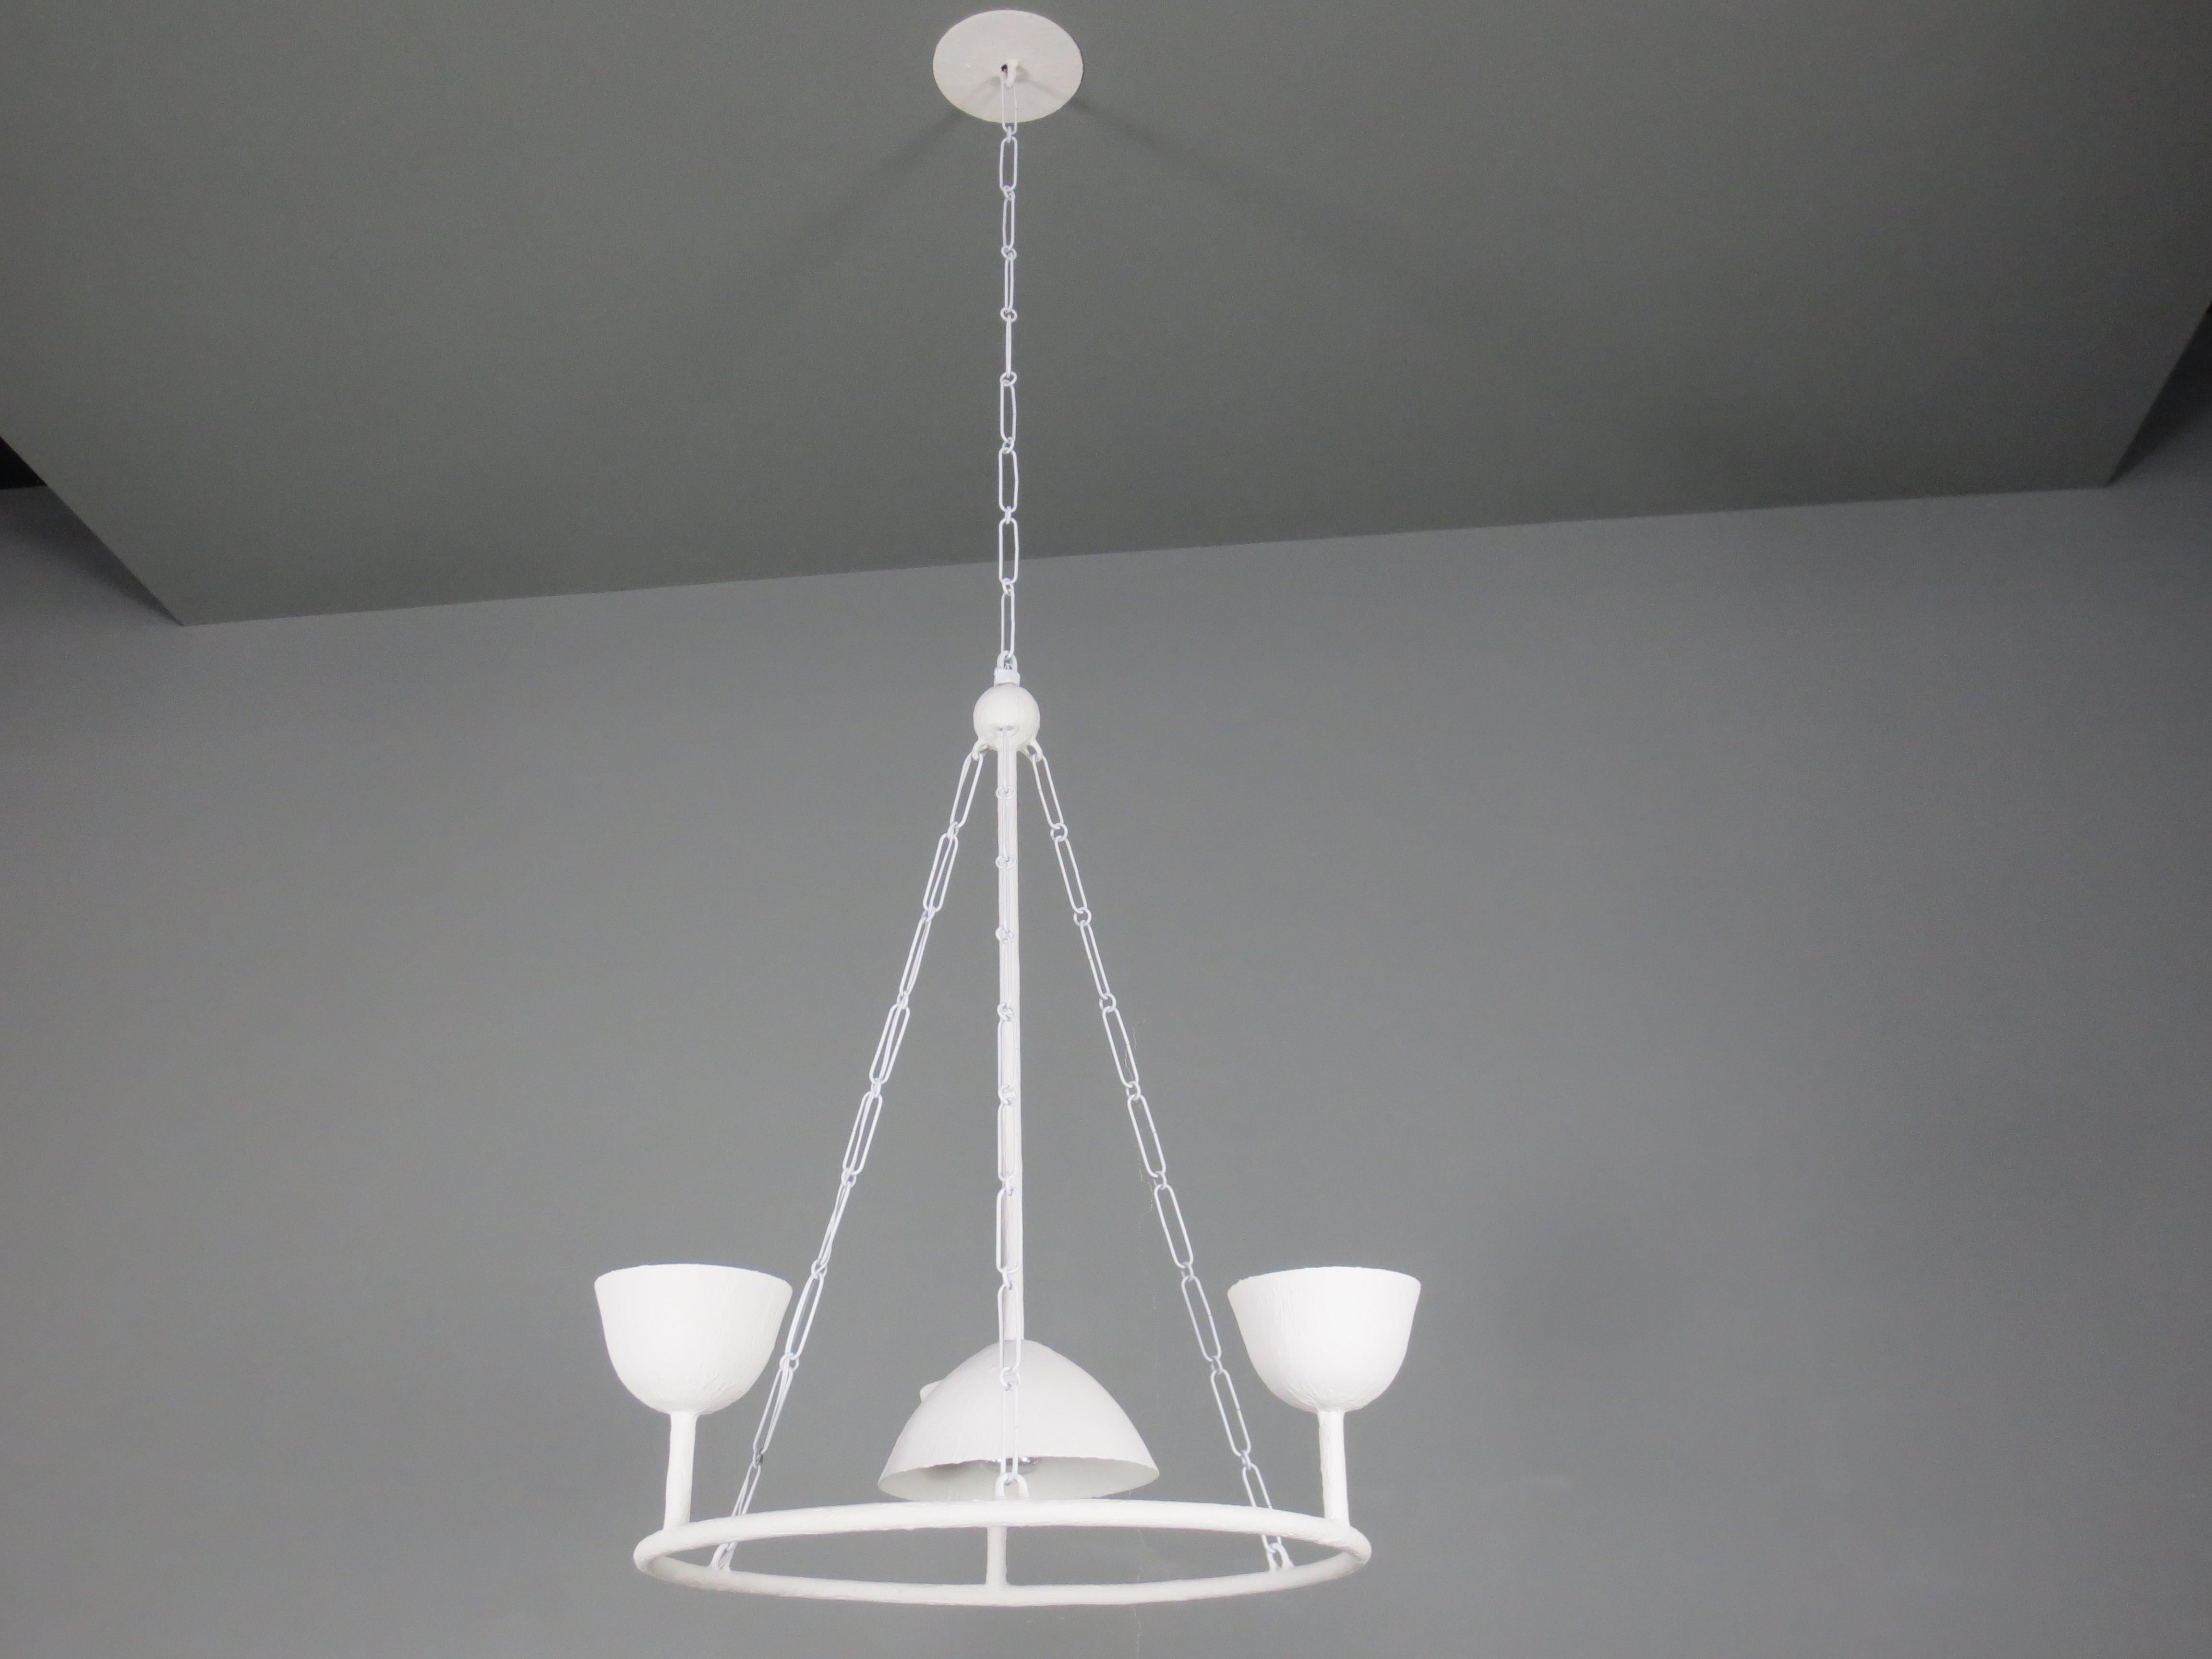 Circle of 4 cups plaster and steel chandelier with a white enamel finish. May include ball, ceiling CAP along with matching chain. These chandeliers are custom, made-to-order. This design can be modified to any specific shape and size and they can